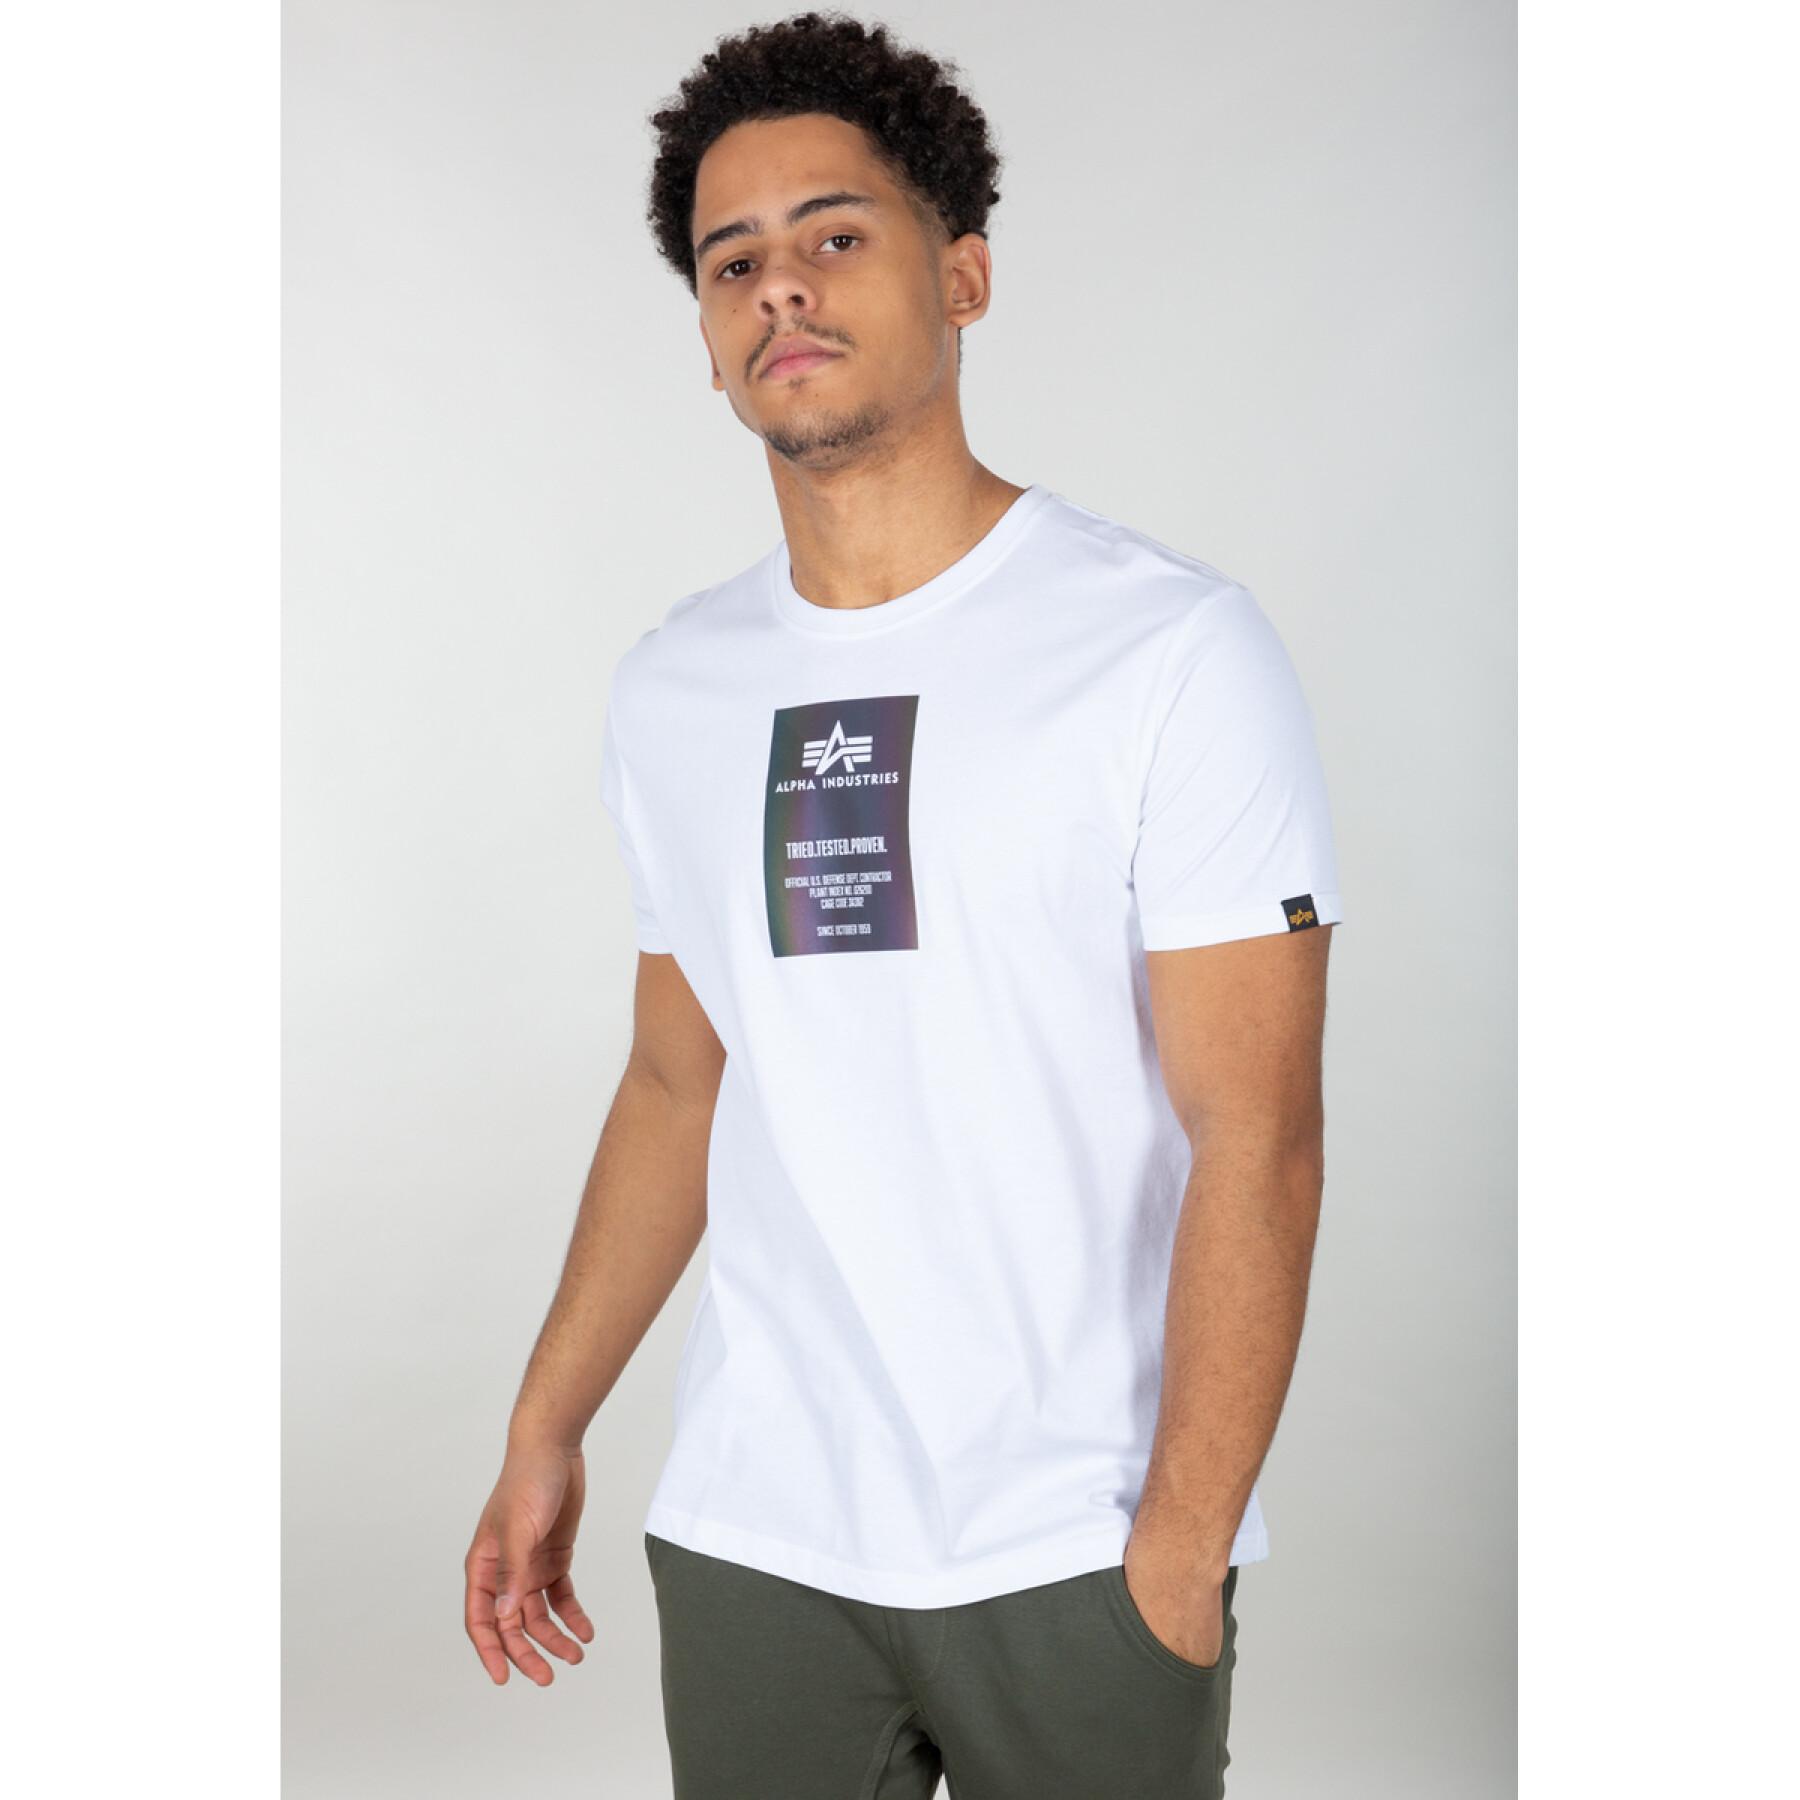 T-shirt Alpha Industries Rainbow Reflective Label - T-shirts and Polo shirts  - Man - Lifestyle